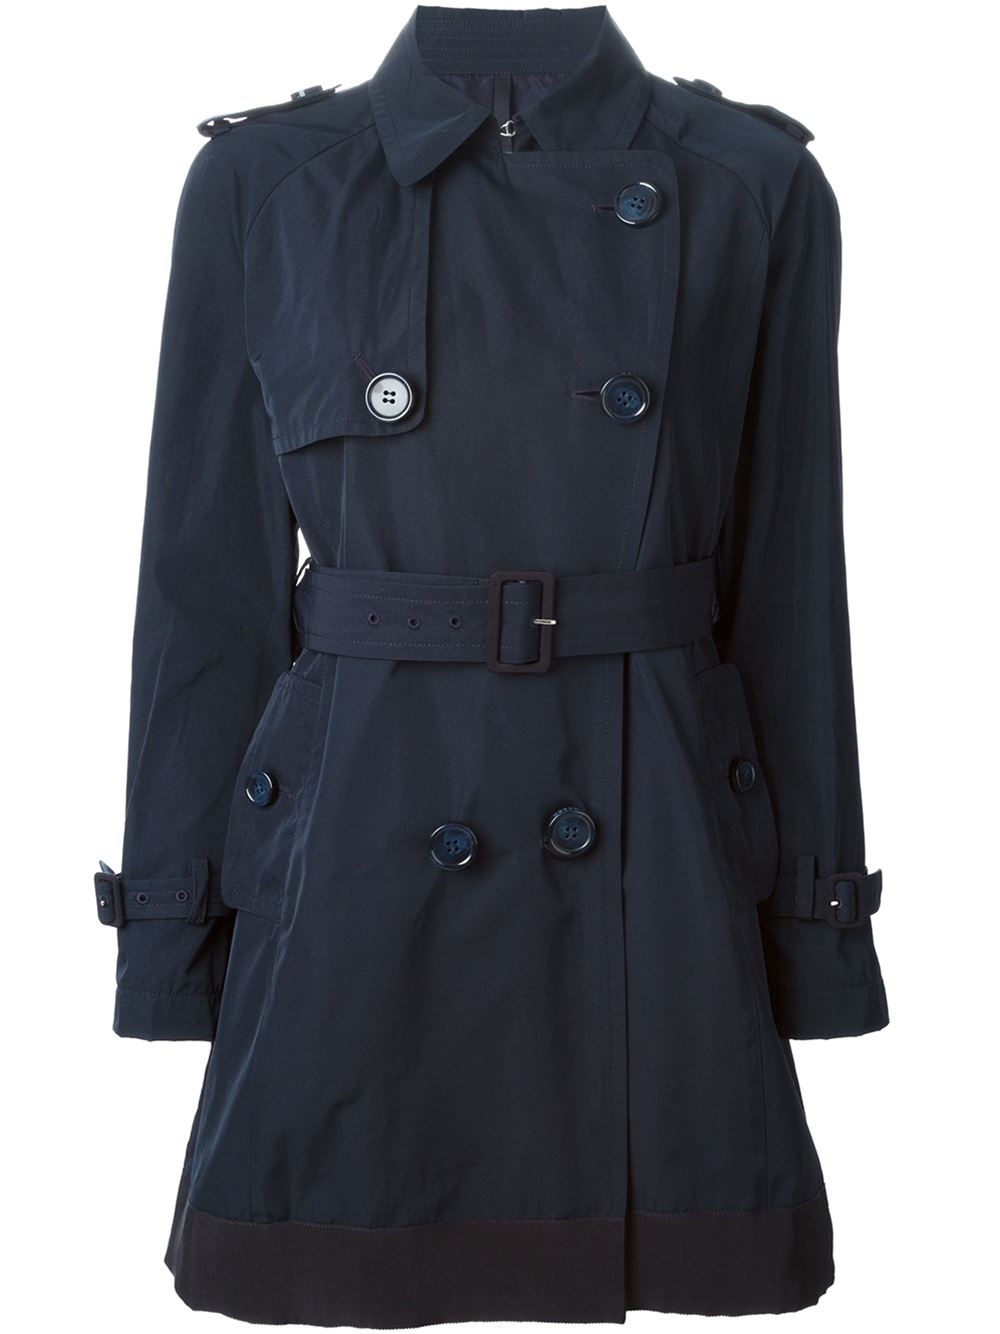 Lyst - Moncler Belted Trench Coat in Blue